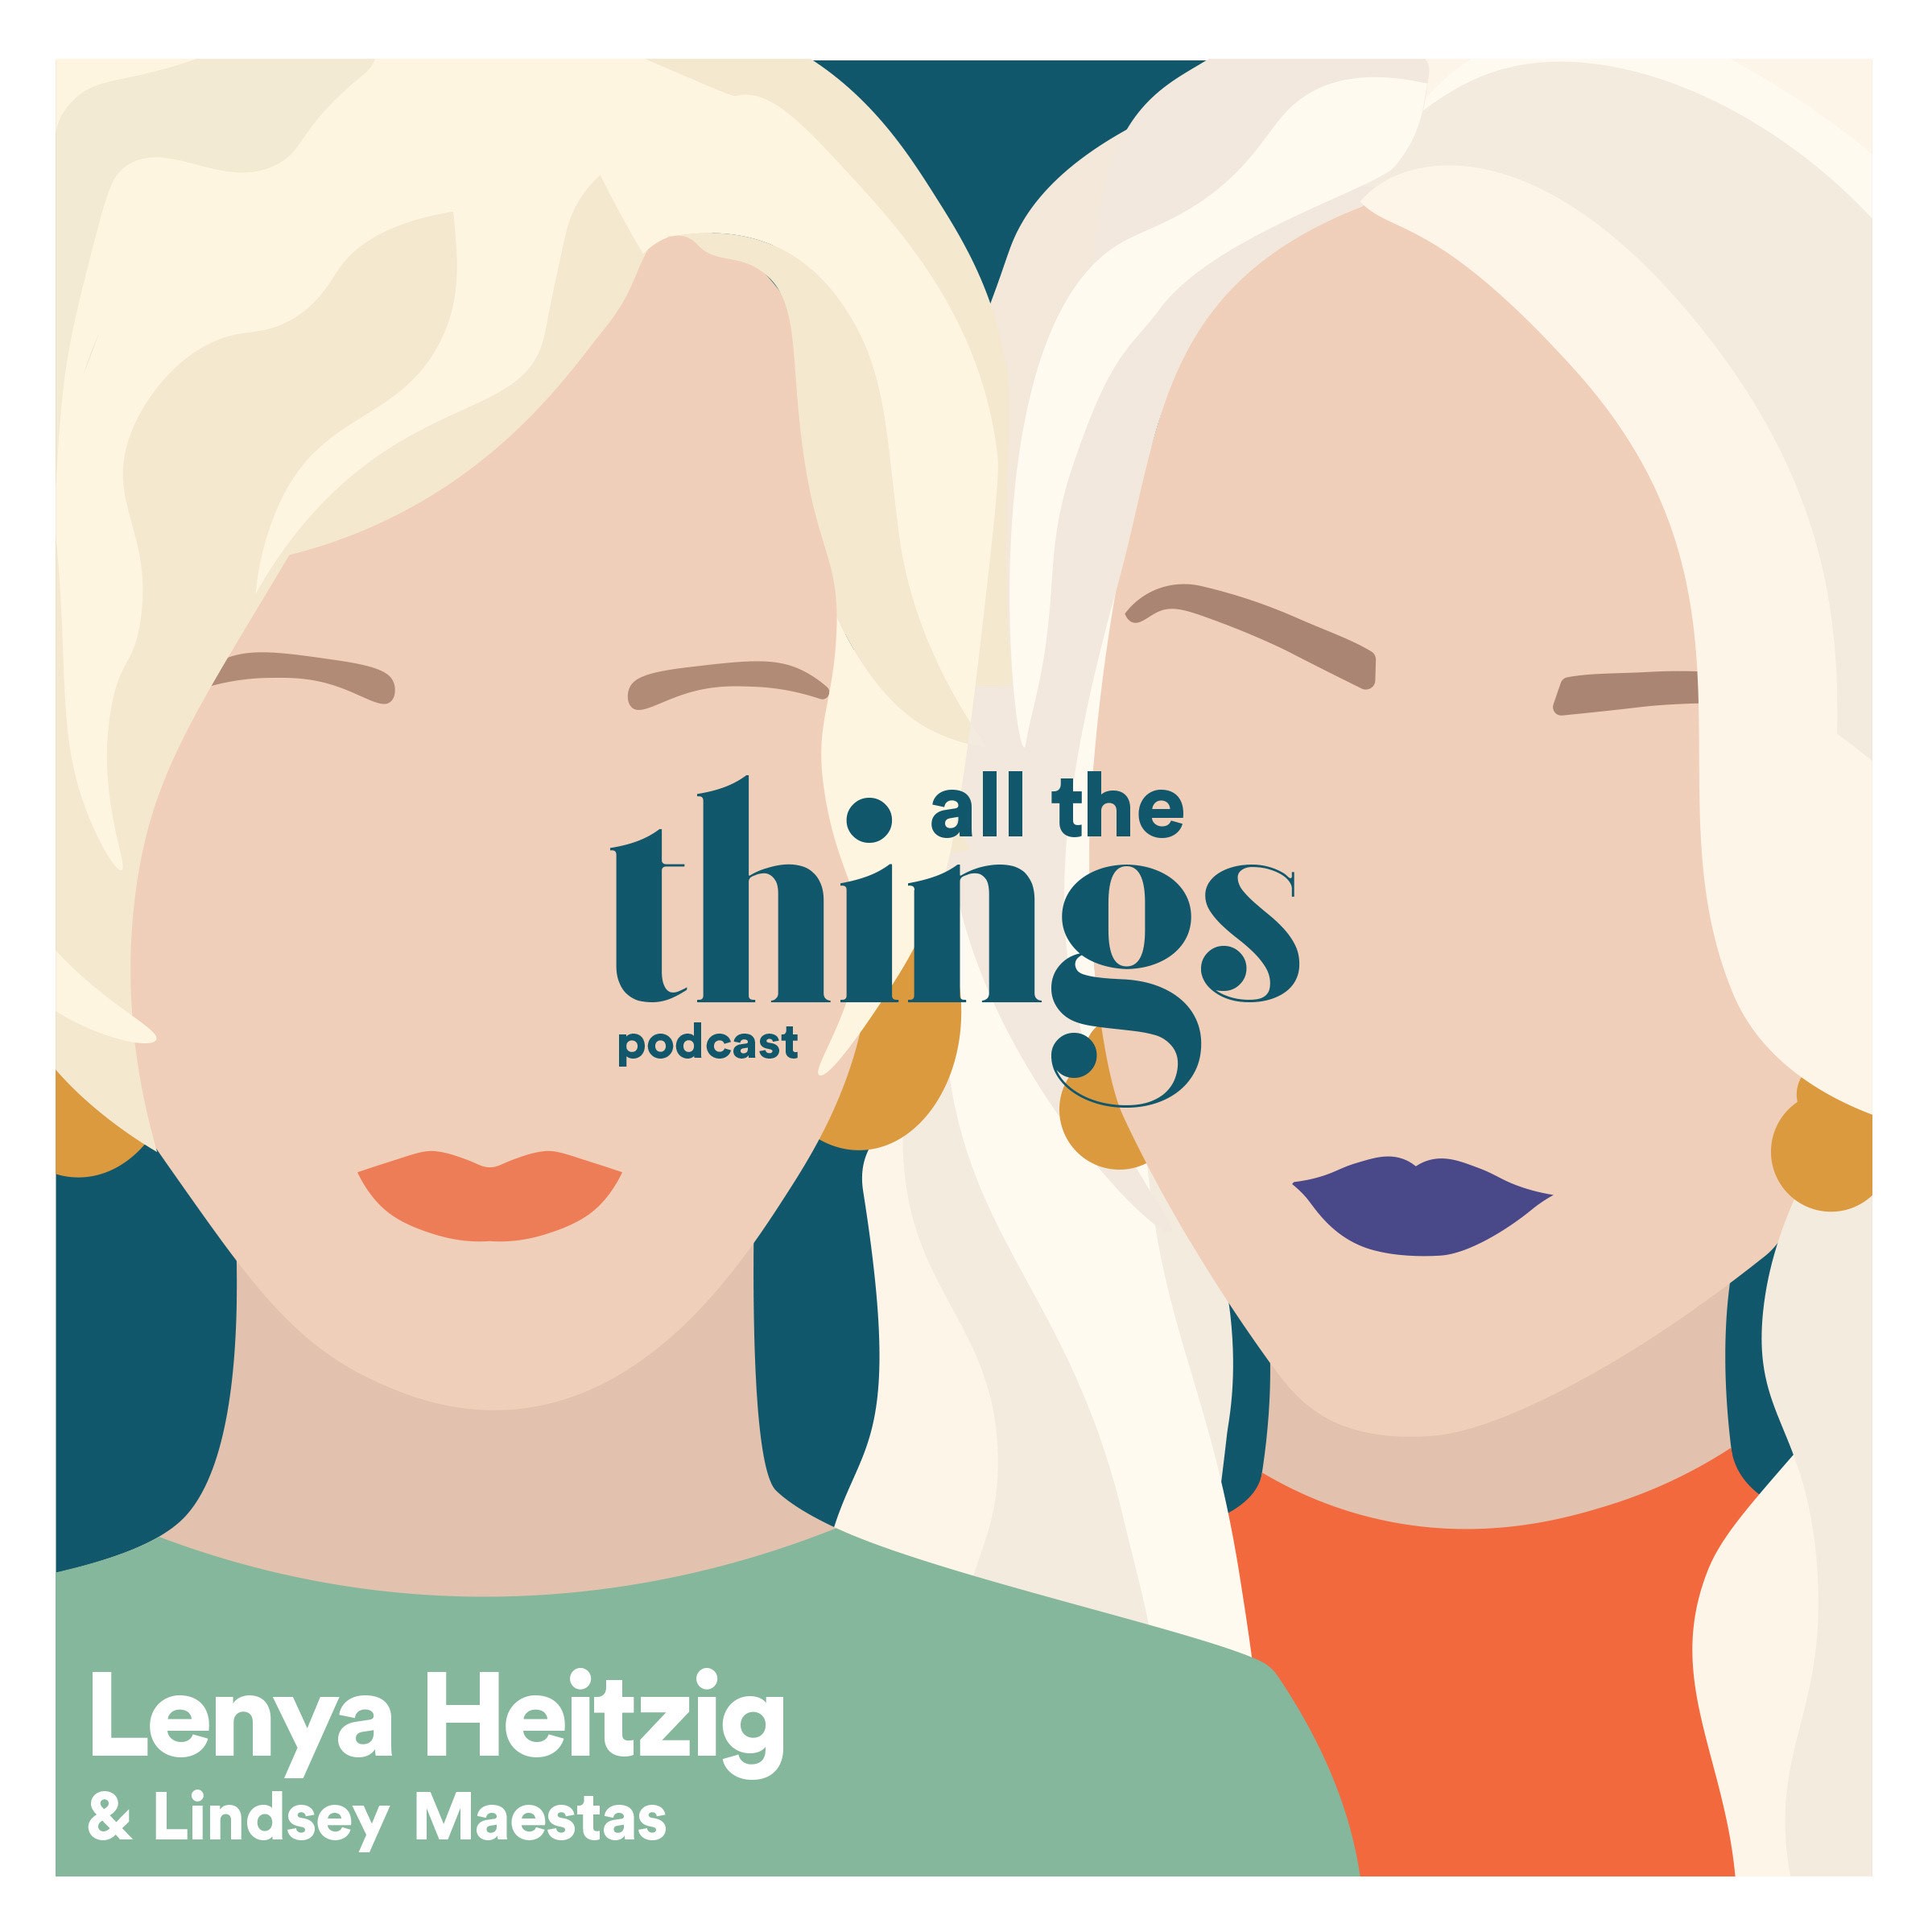 The All the Things Podcast